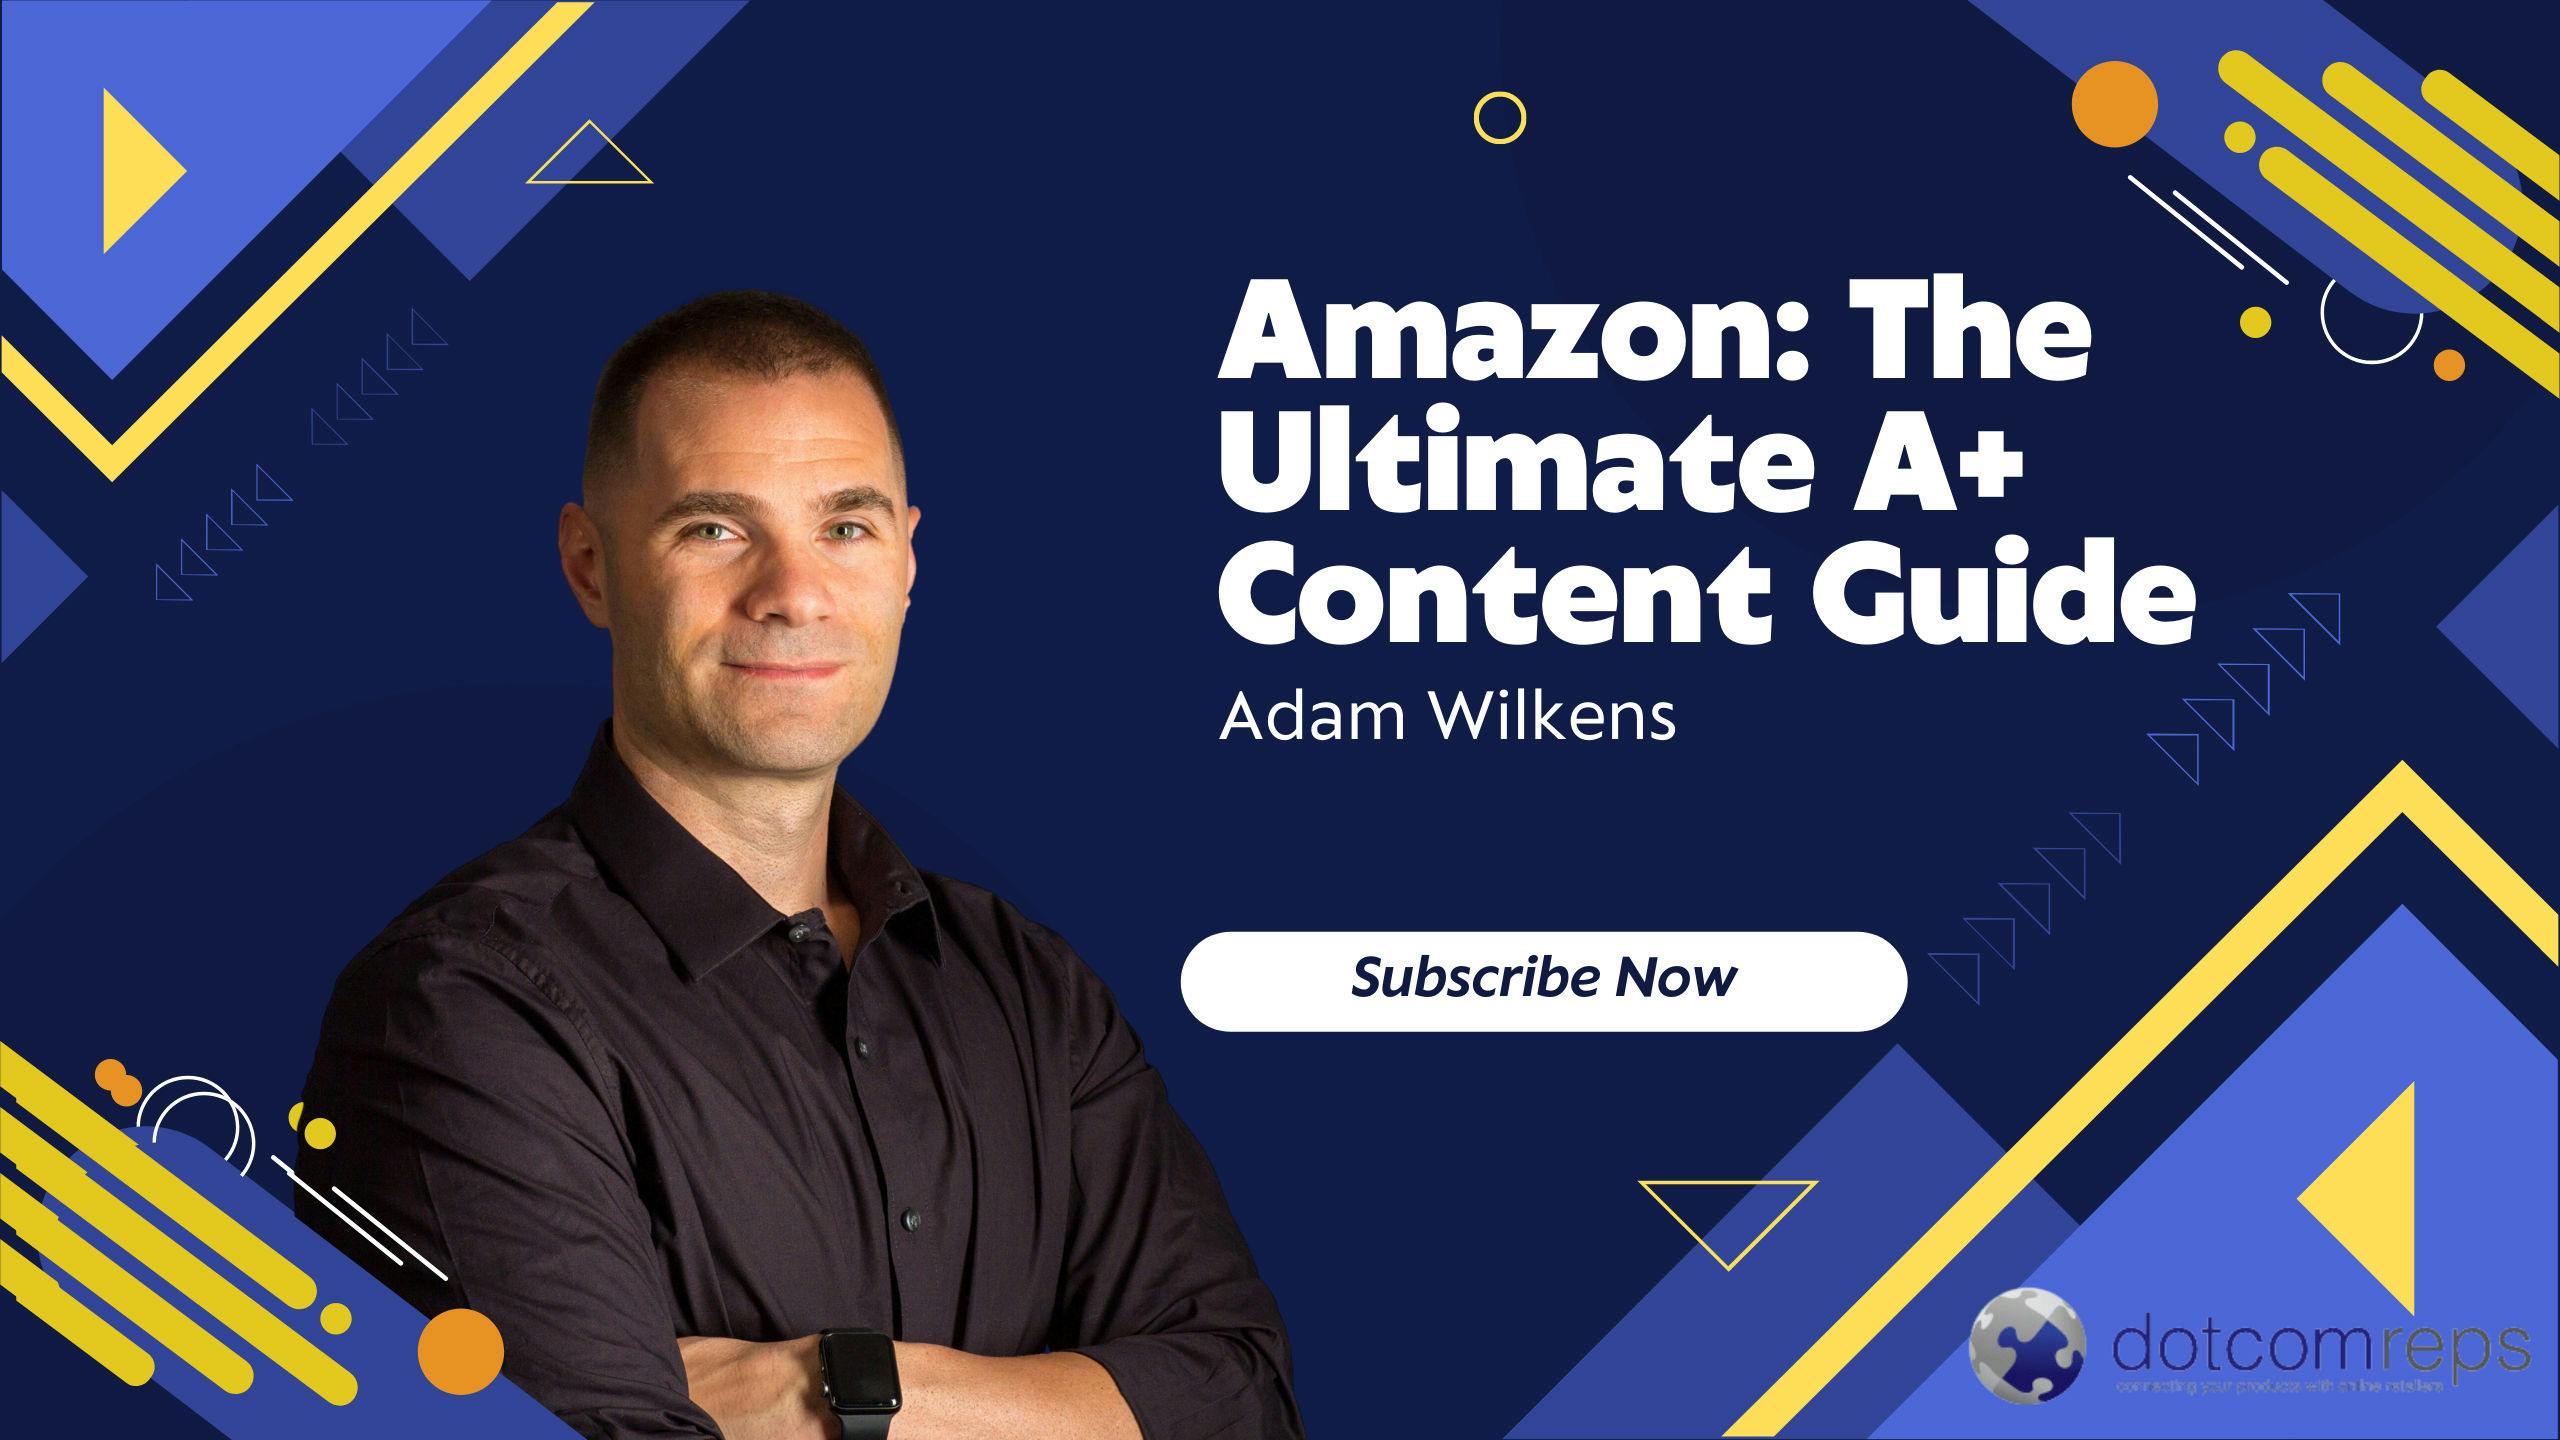 The Ultimate Guide to Creation Amazon A+ Content with Brand Story